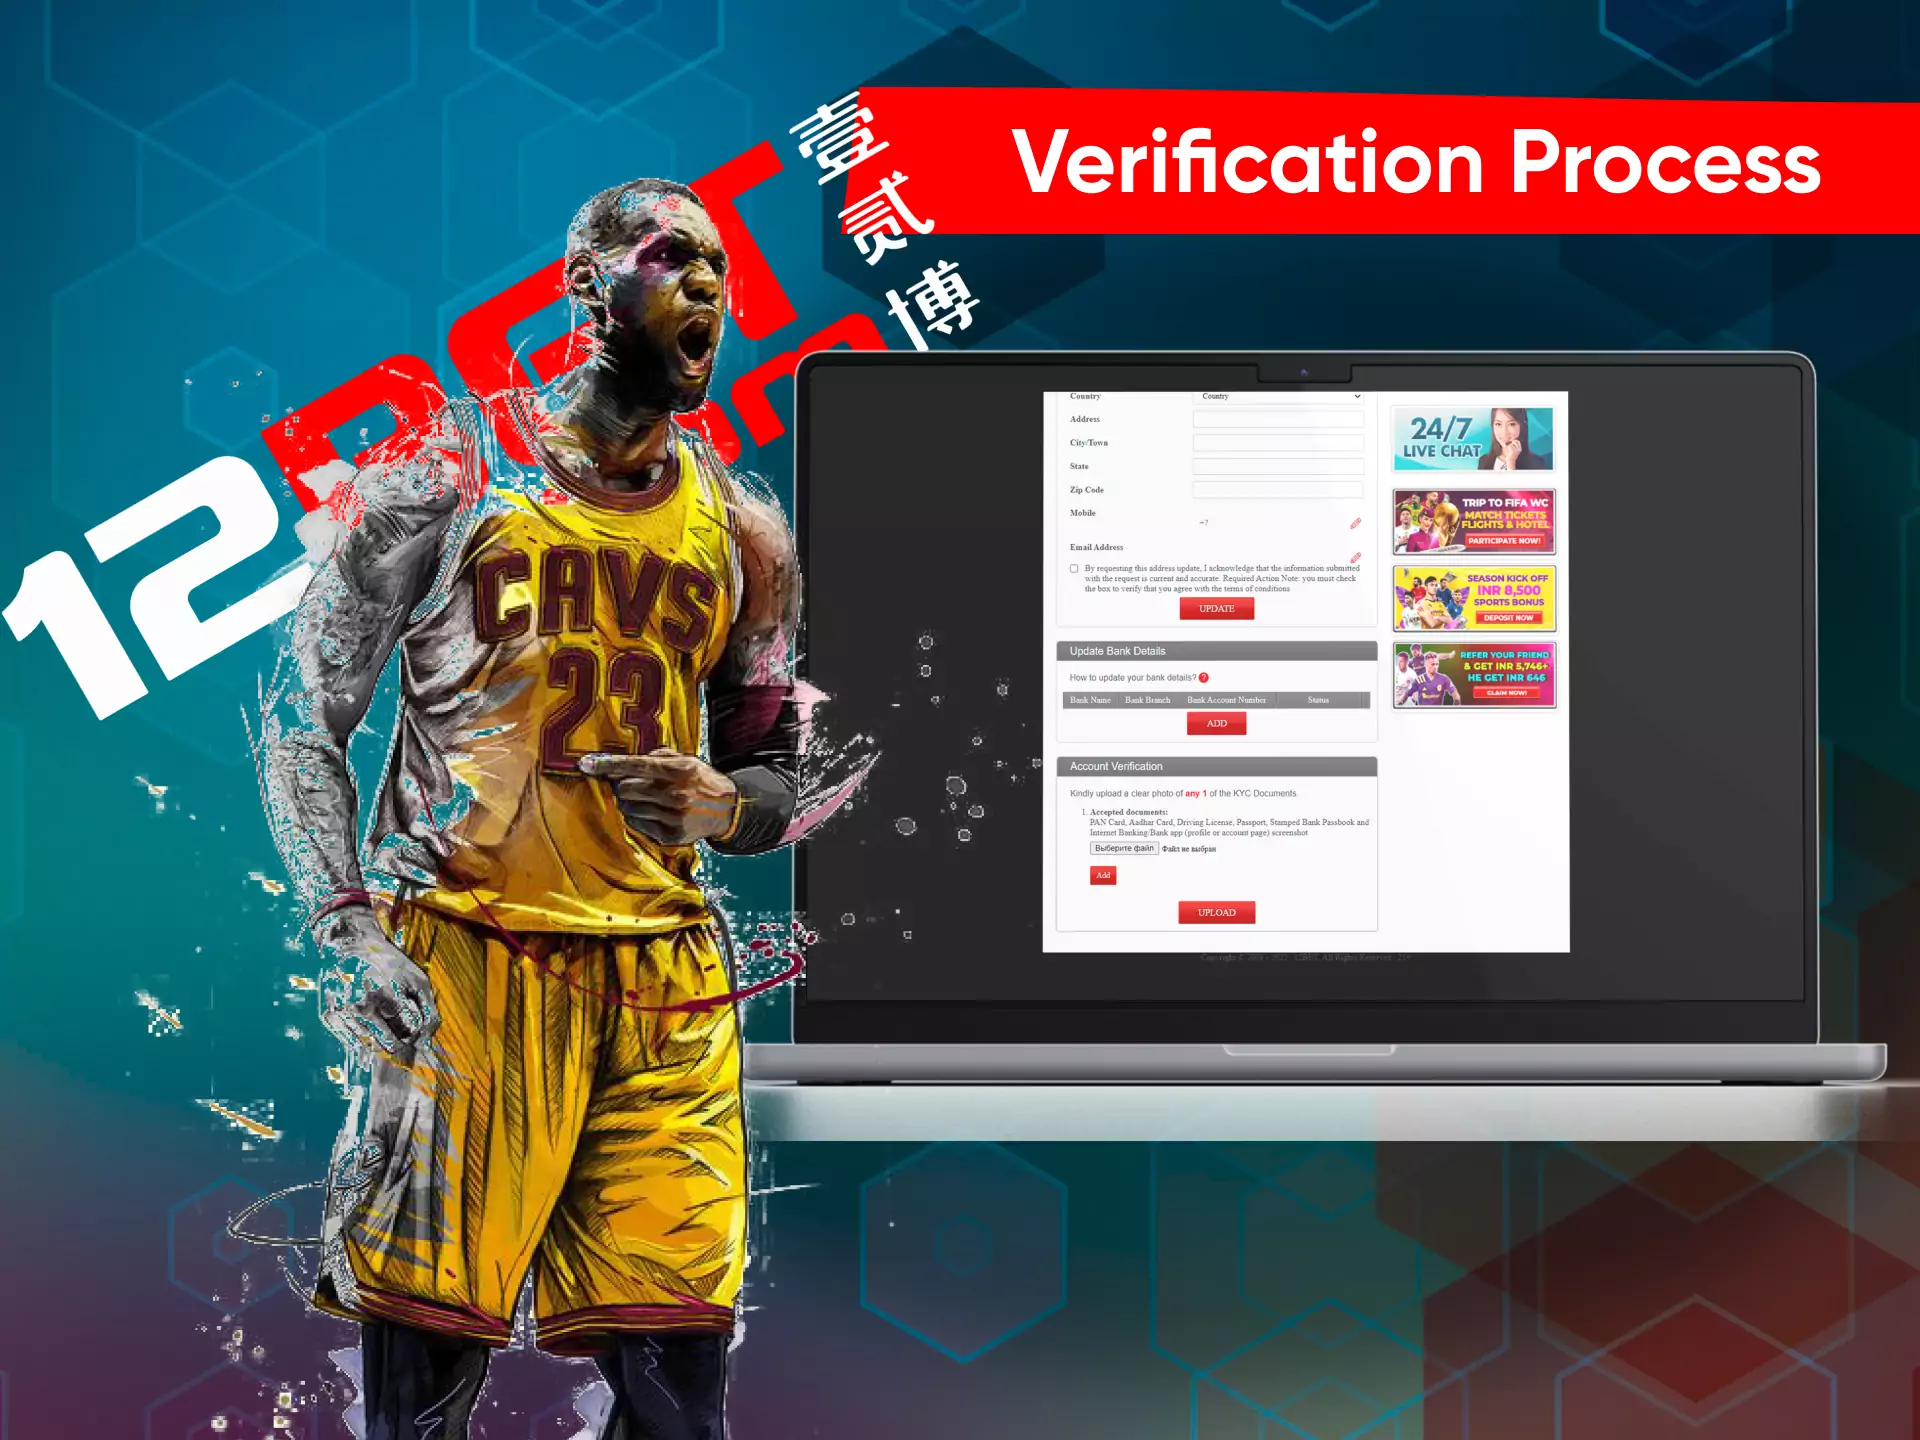 On 12bet, you must verify your account.